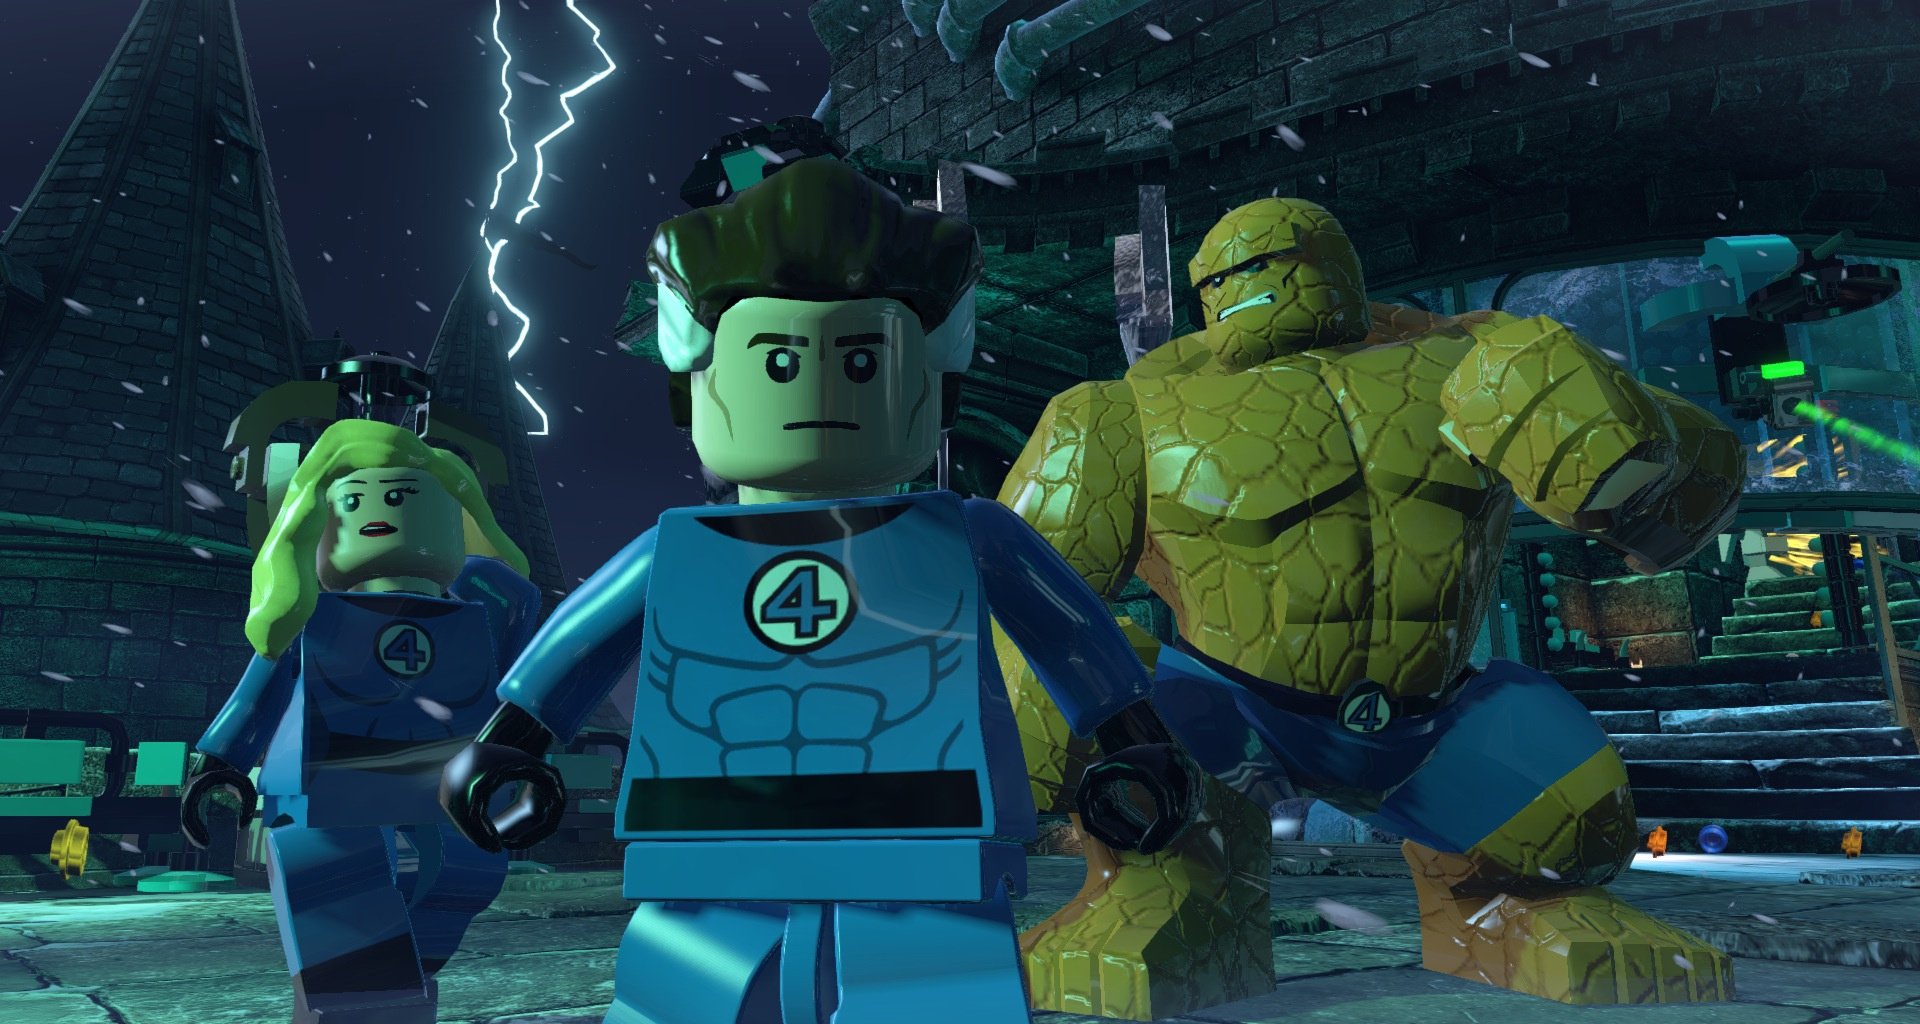 lego marvel superheroes ps4 game